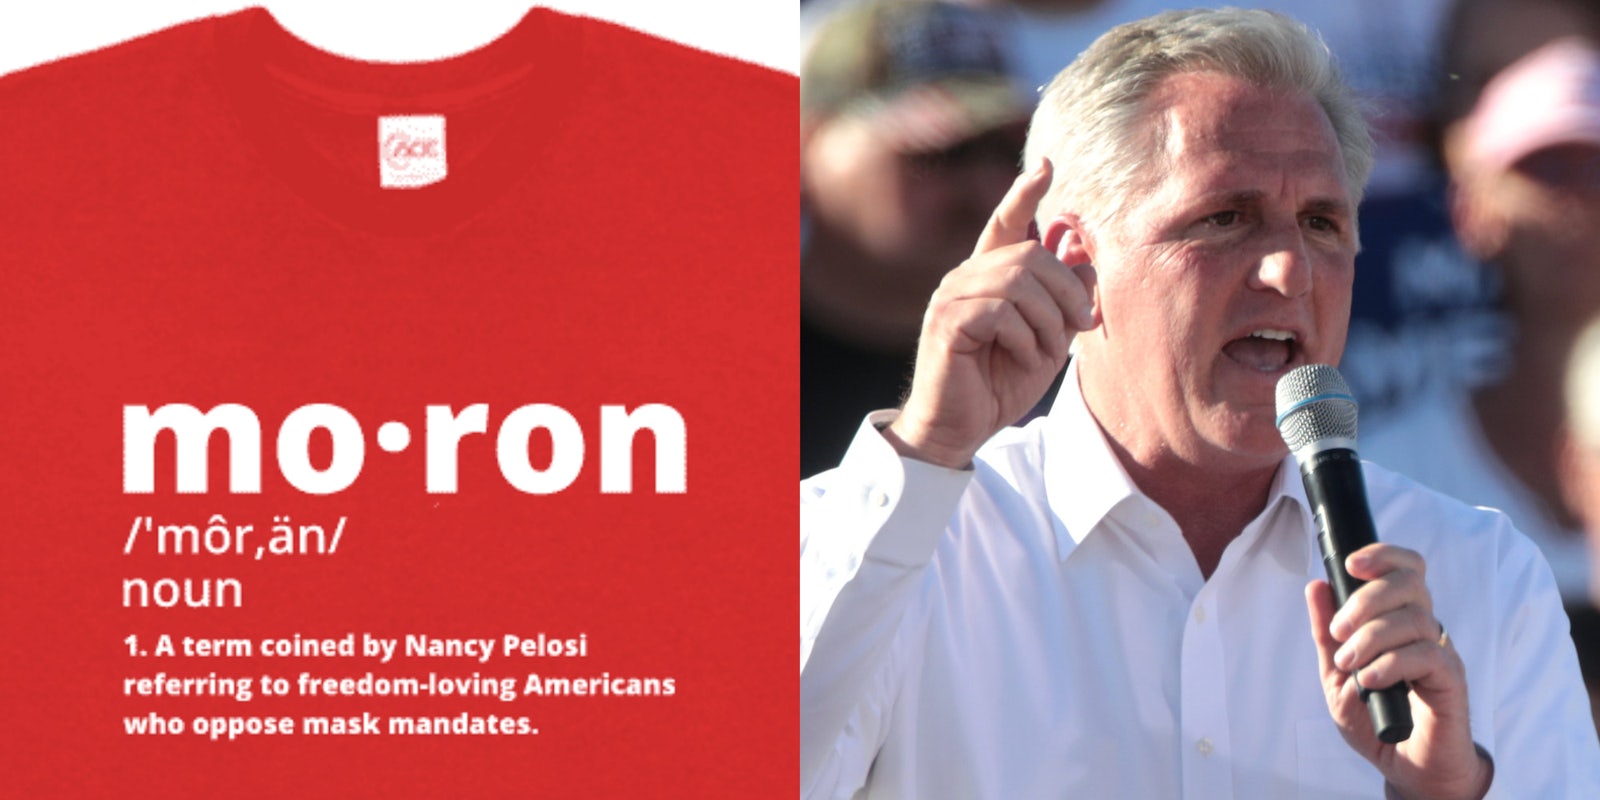 A side by side of House GOP Leader Kevin McCarthy and a t-shirt he is hawking that says moron on it.